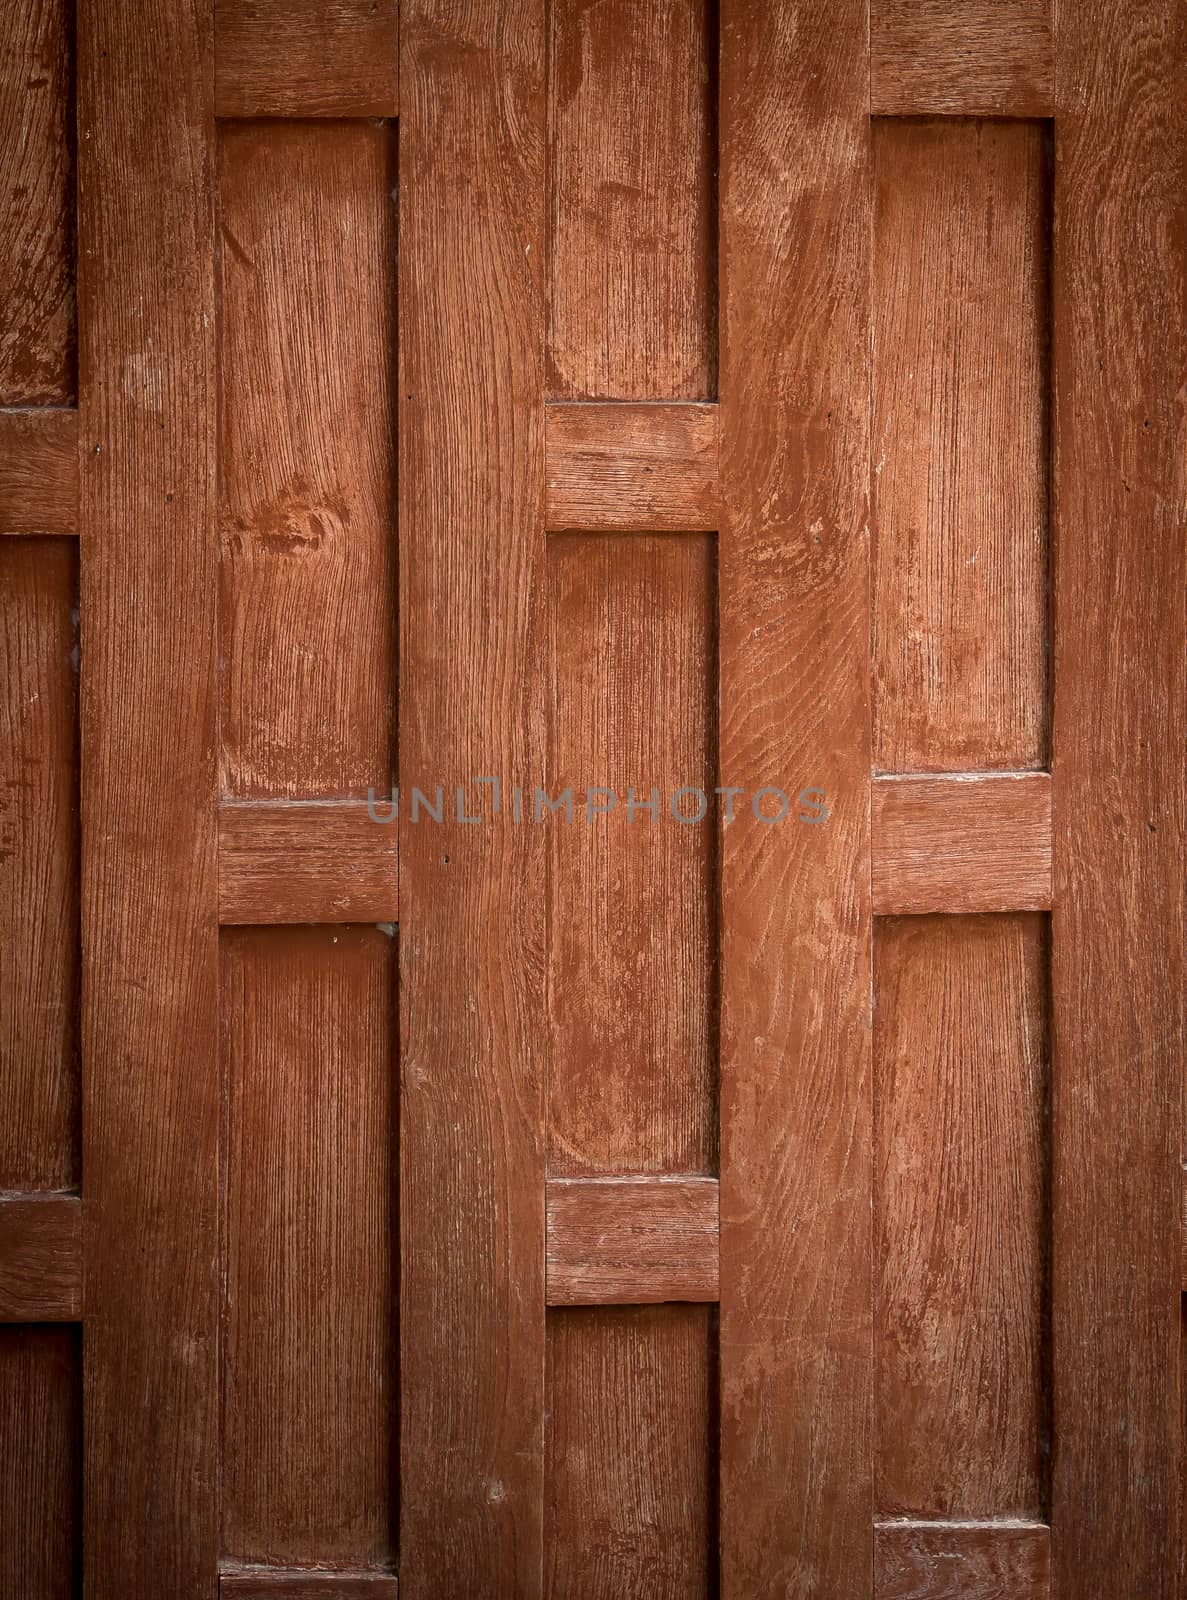 Thai style wooden wall by simpleBE